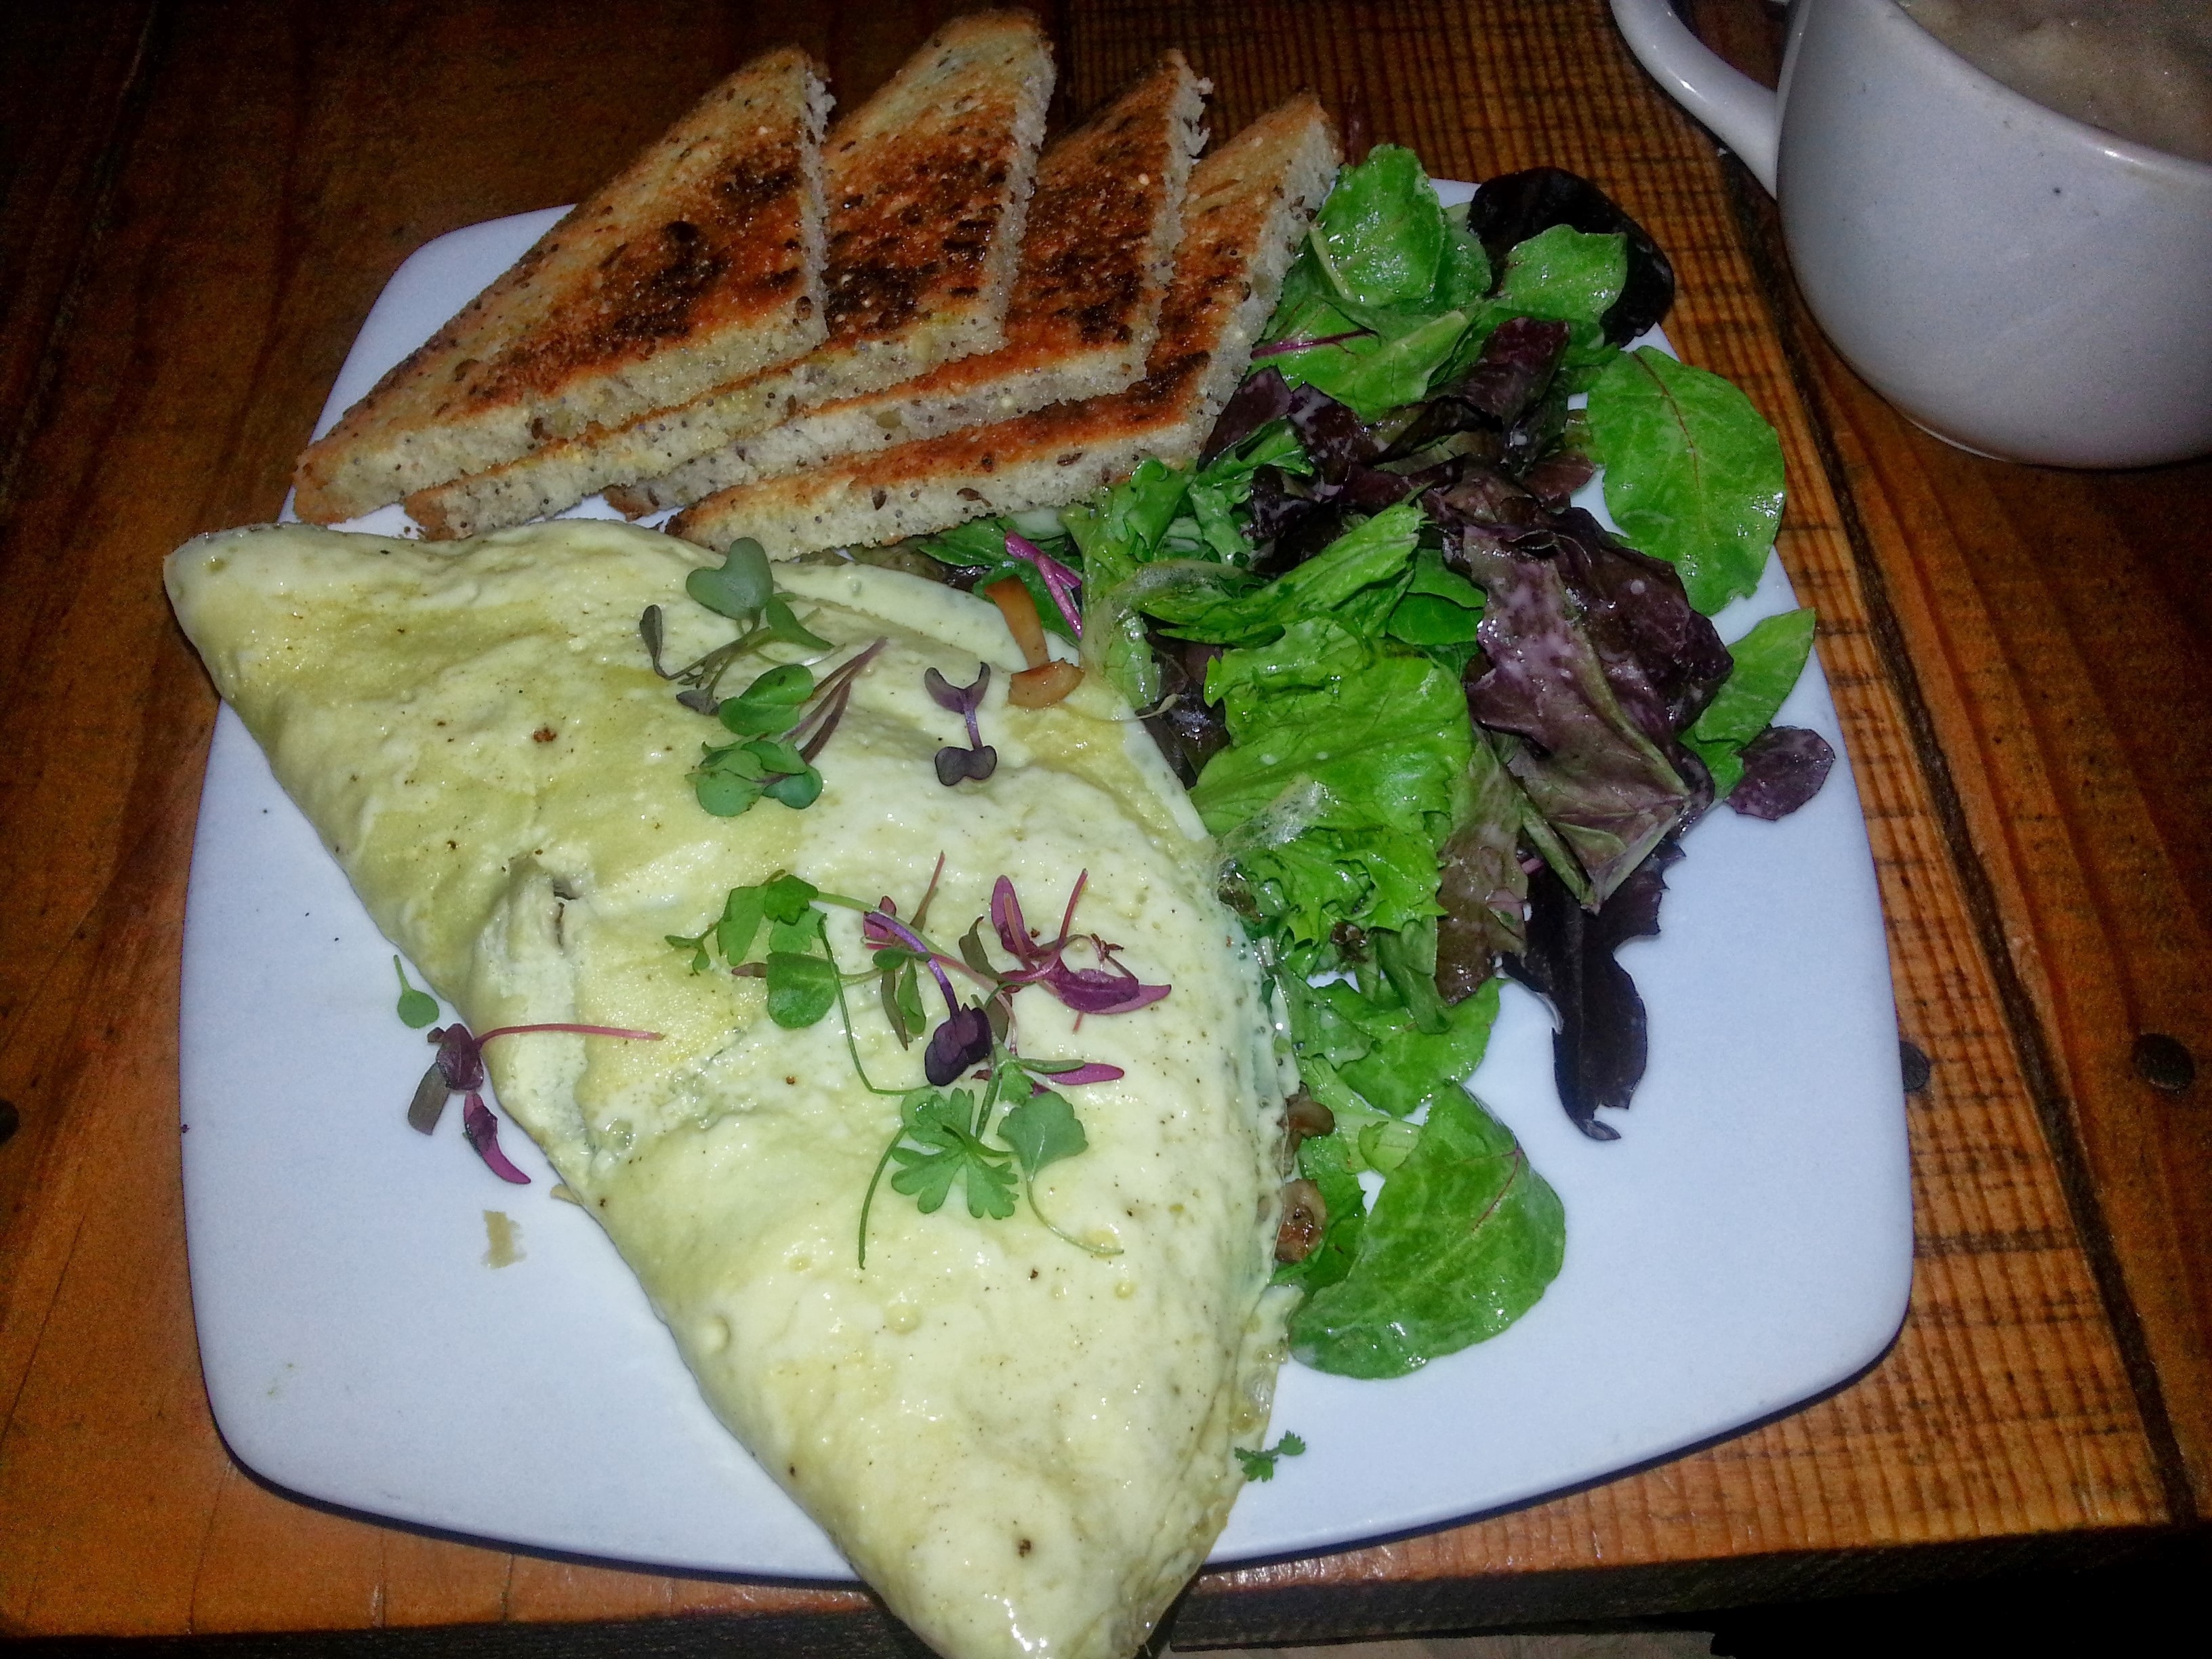 omelet with vegetables